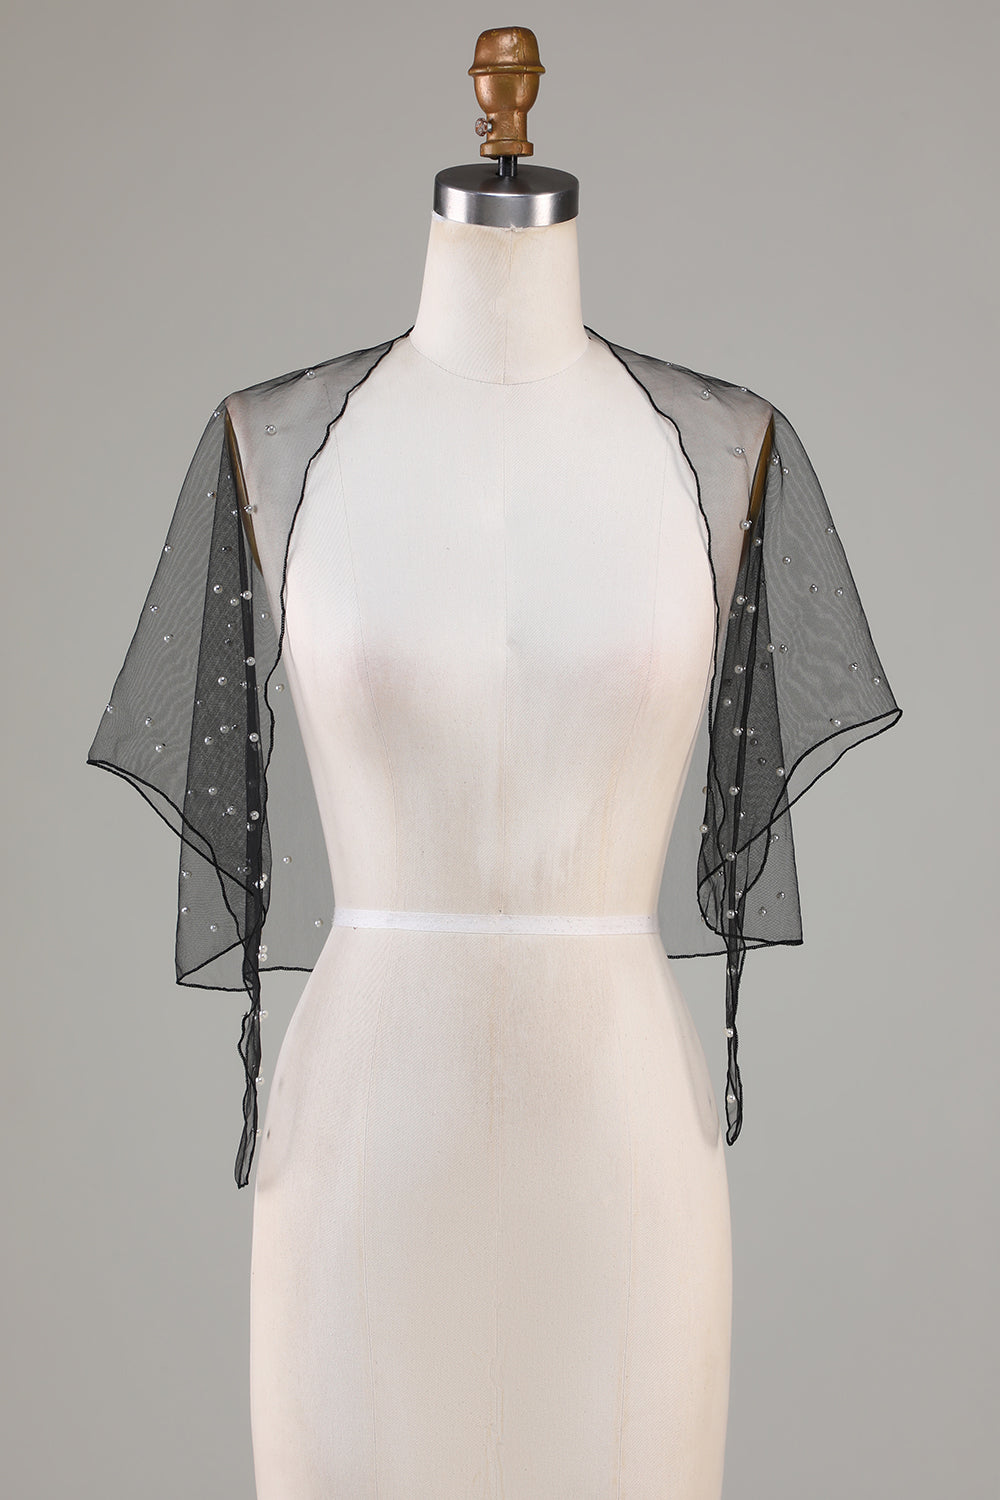 Black Tulle 1920s Cape with Pearls